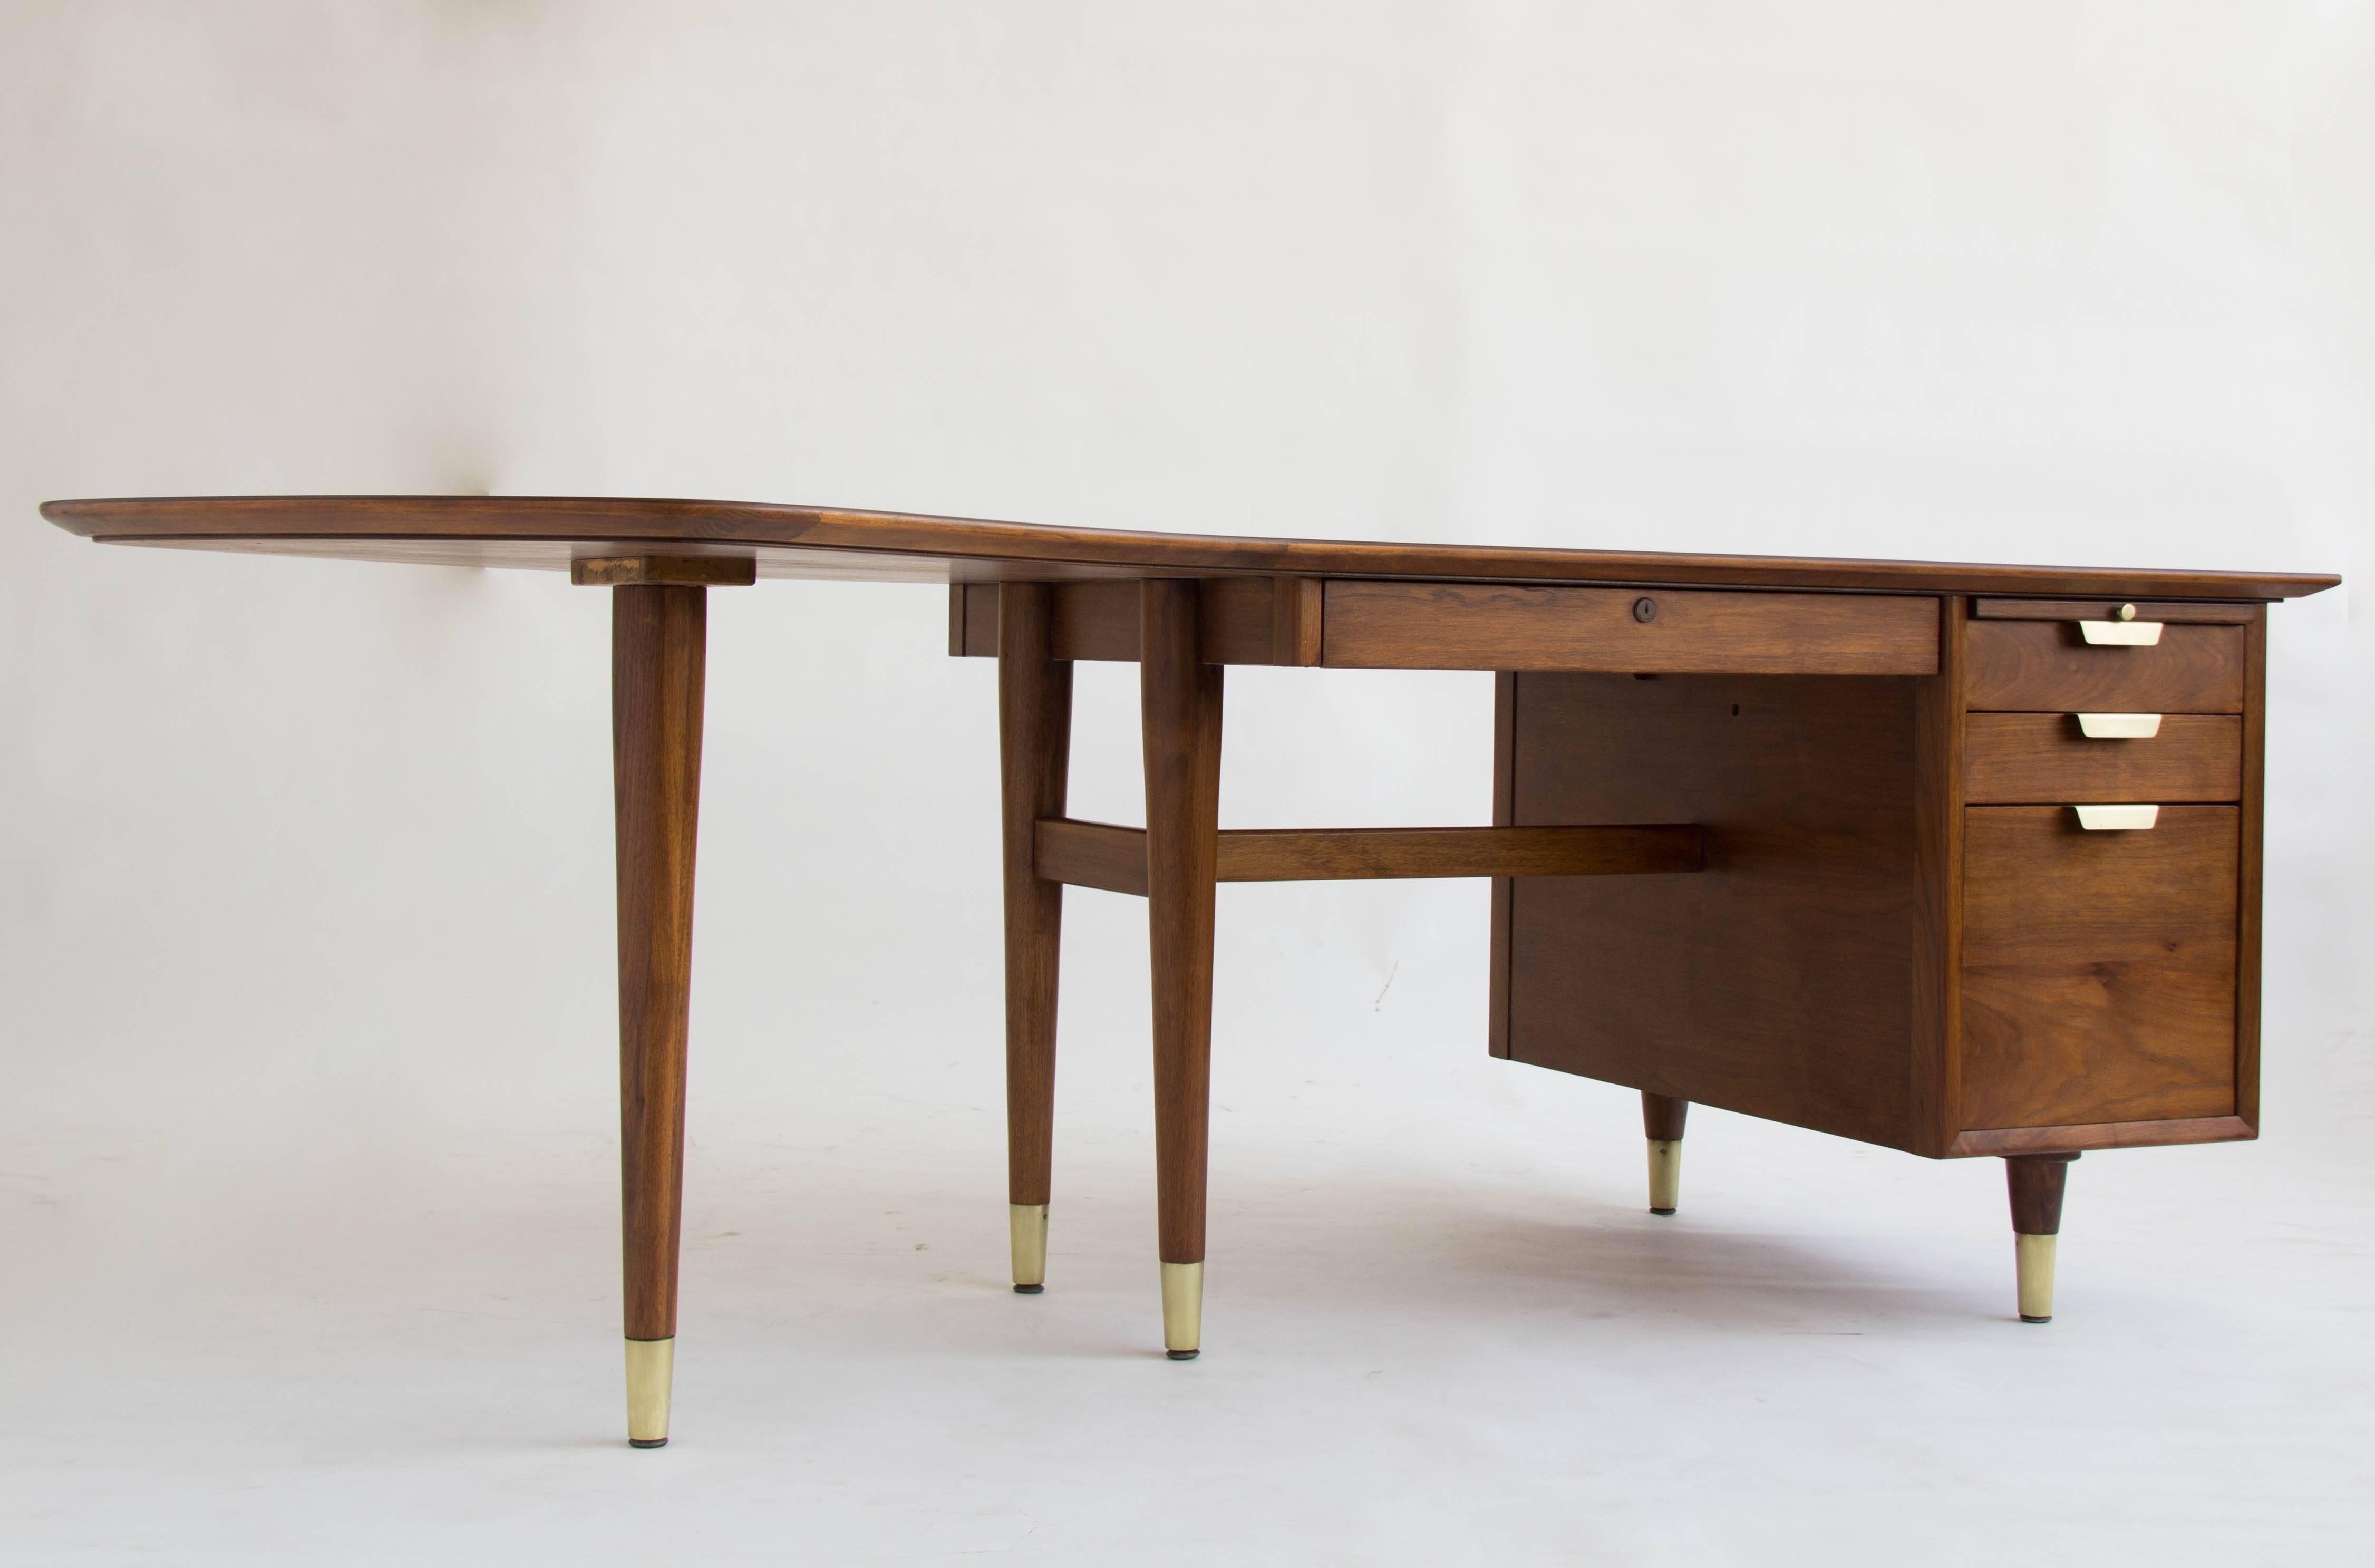 This walnut executive desk features a unique boomerang-shaped left return. The table surface is walnut and is edged with a band of contrasting grain wood. A shared mechanism locks all three right-hand drawers when the bolt on the center drawer is